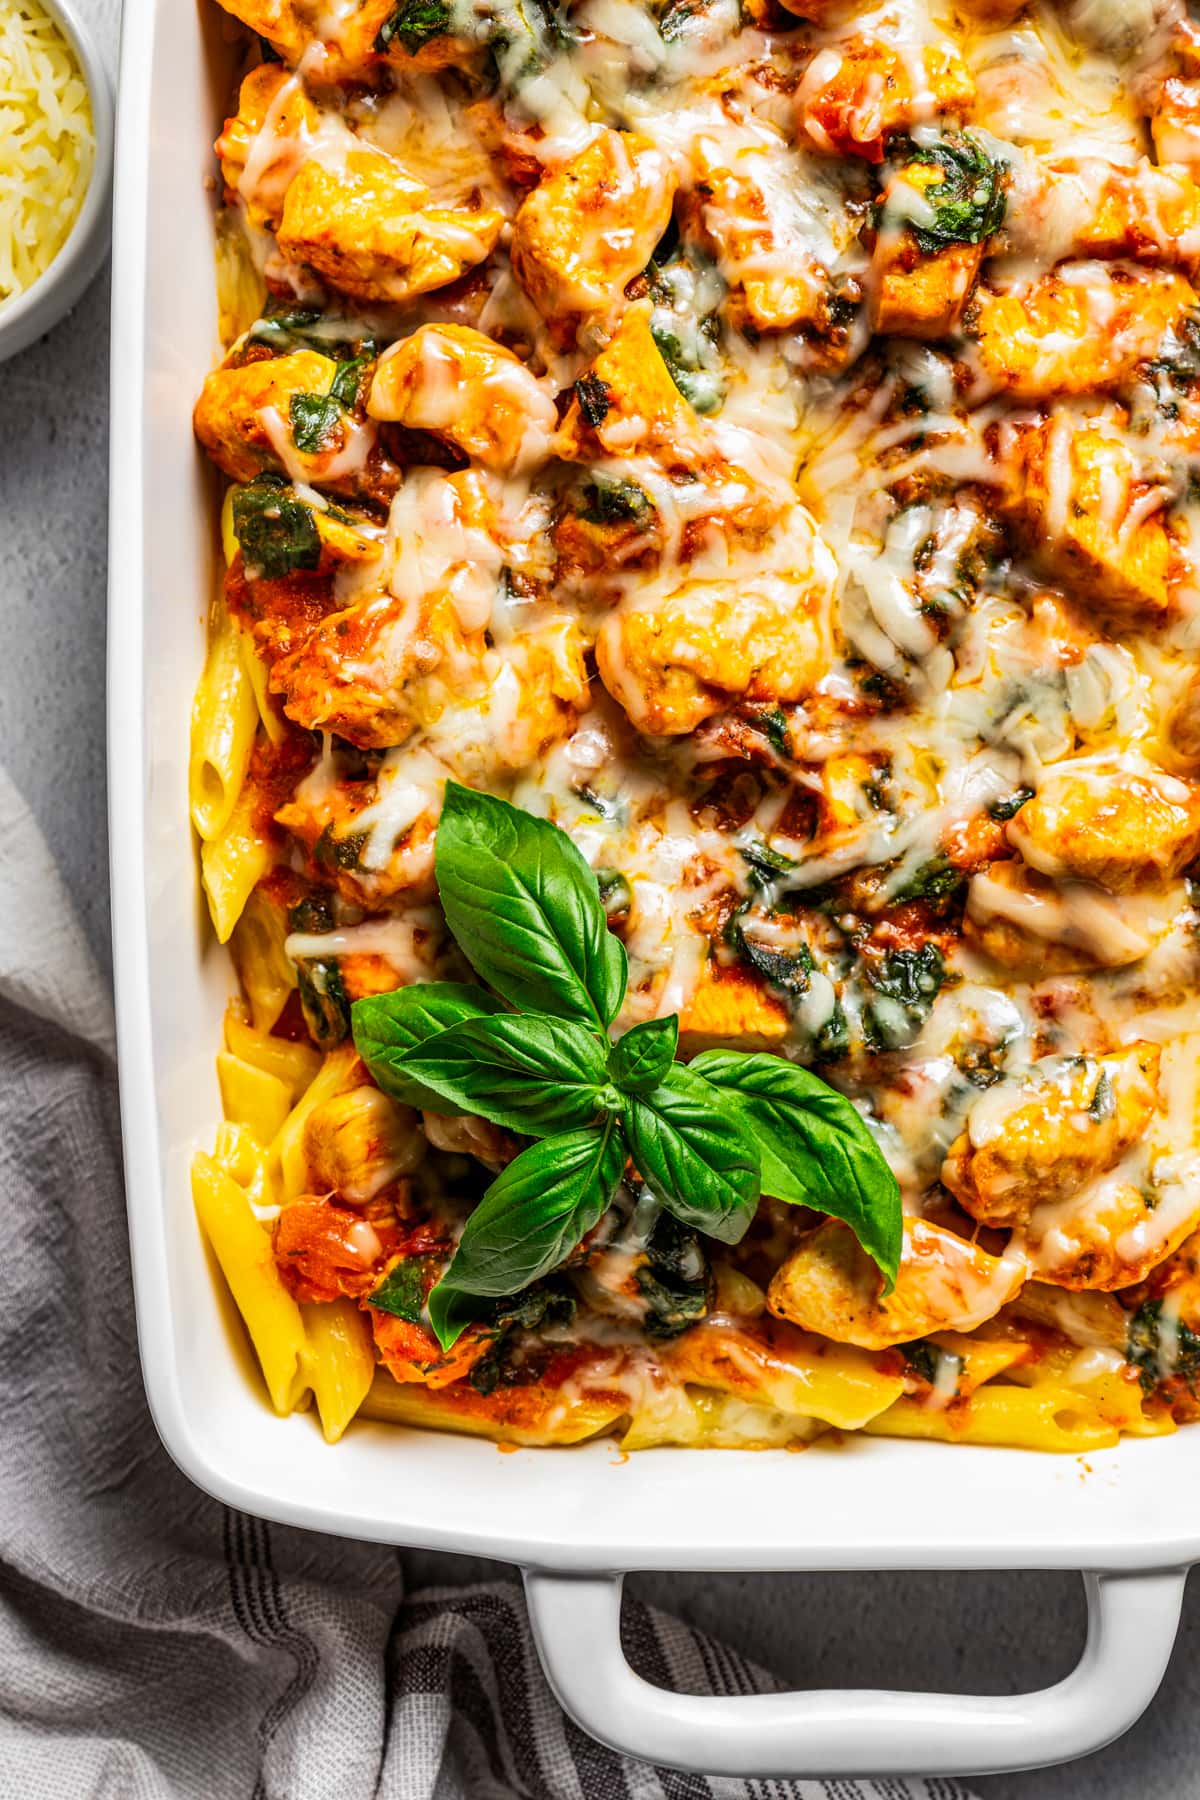 Overhead view of a pasta bake in a casserole dish garnished with basil leaves.